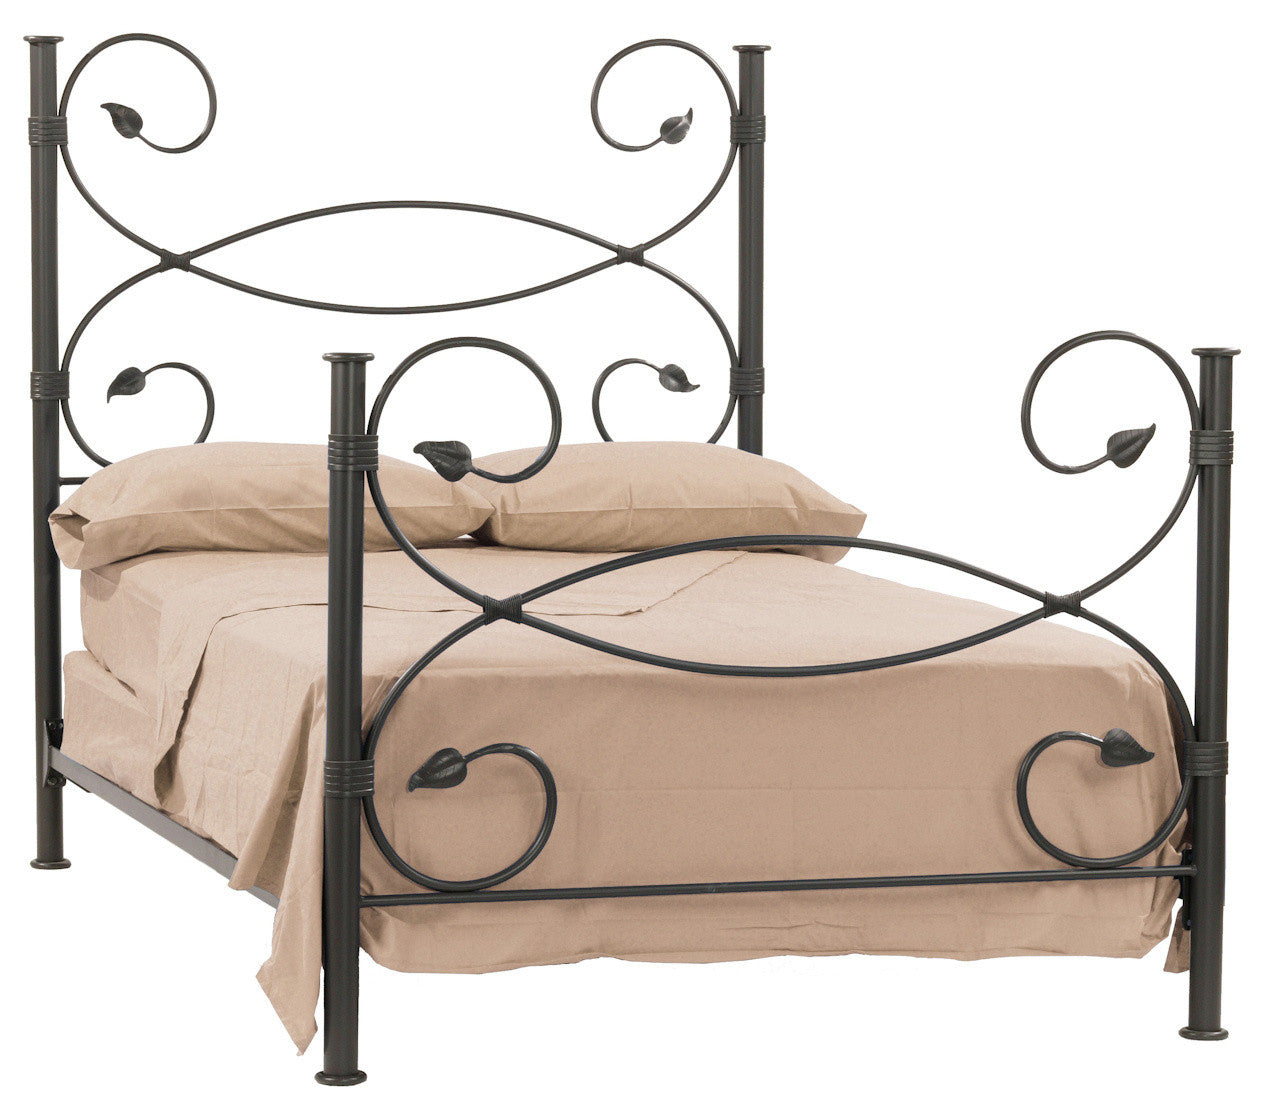 Stone County Ironworks 900-715 Leaf King Bed